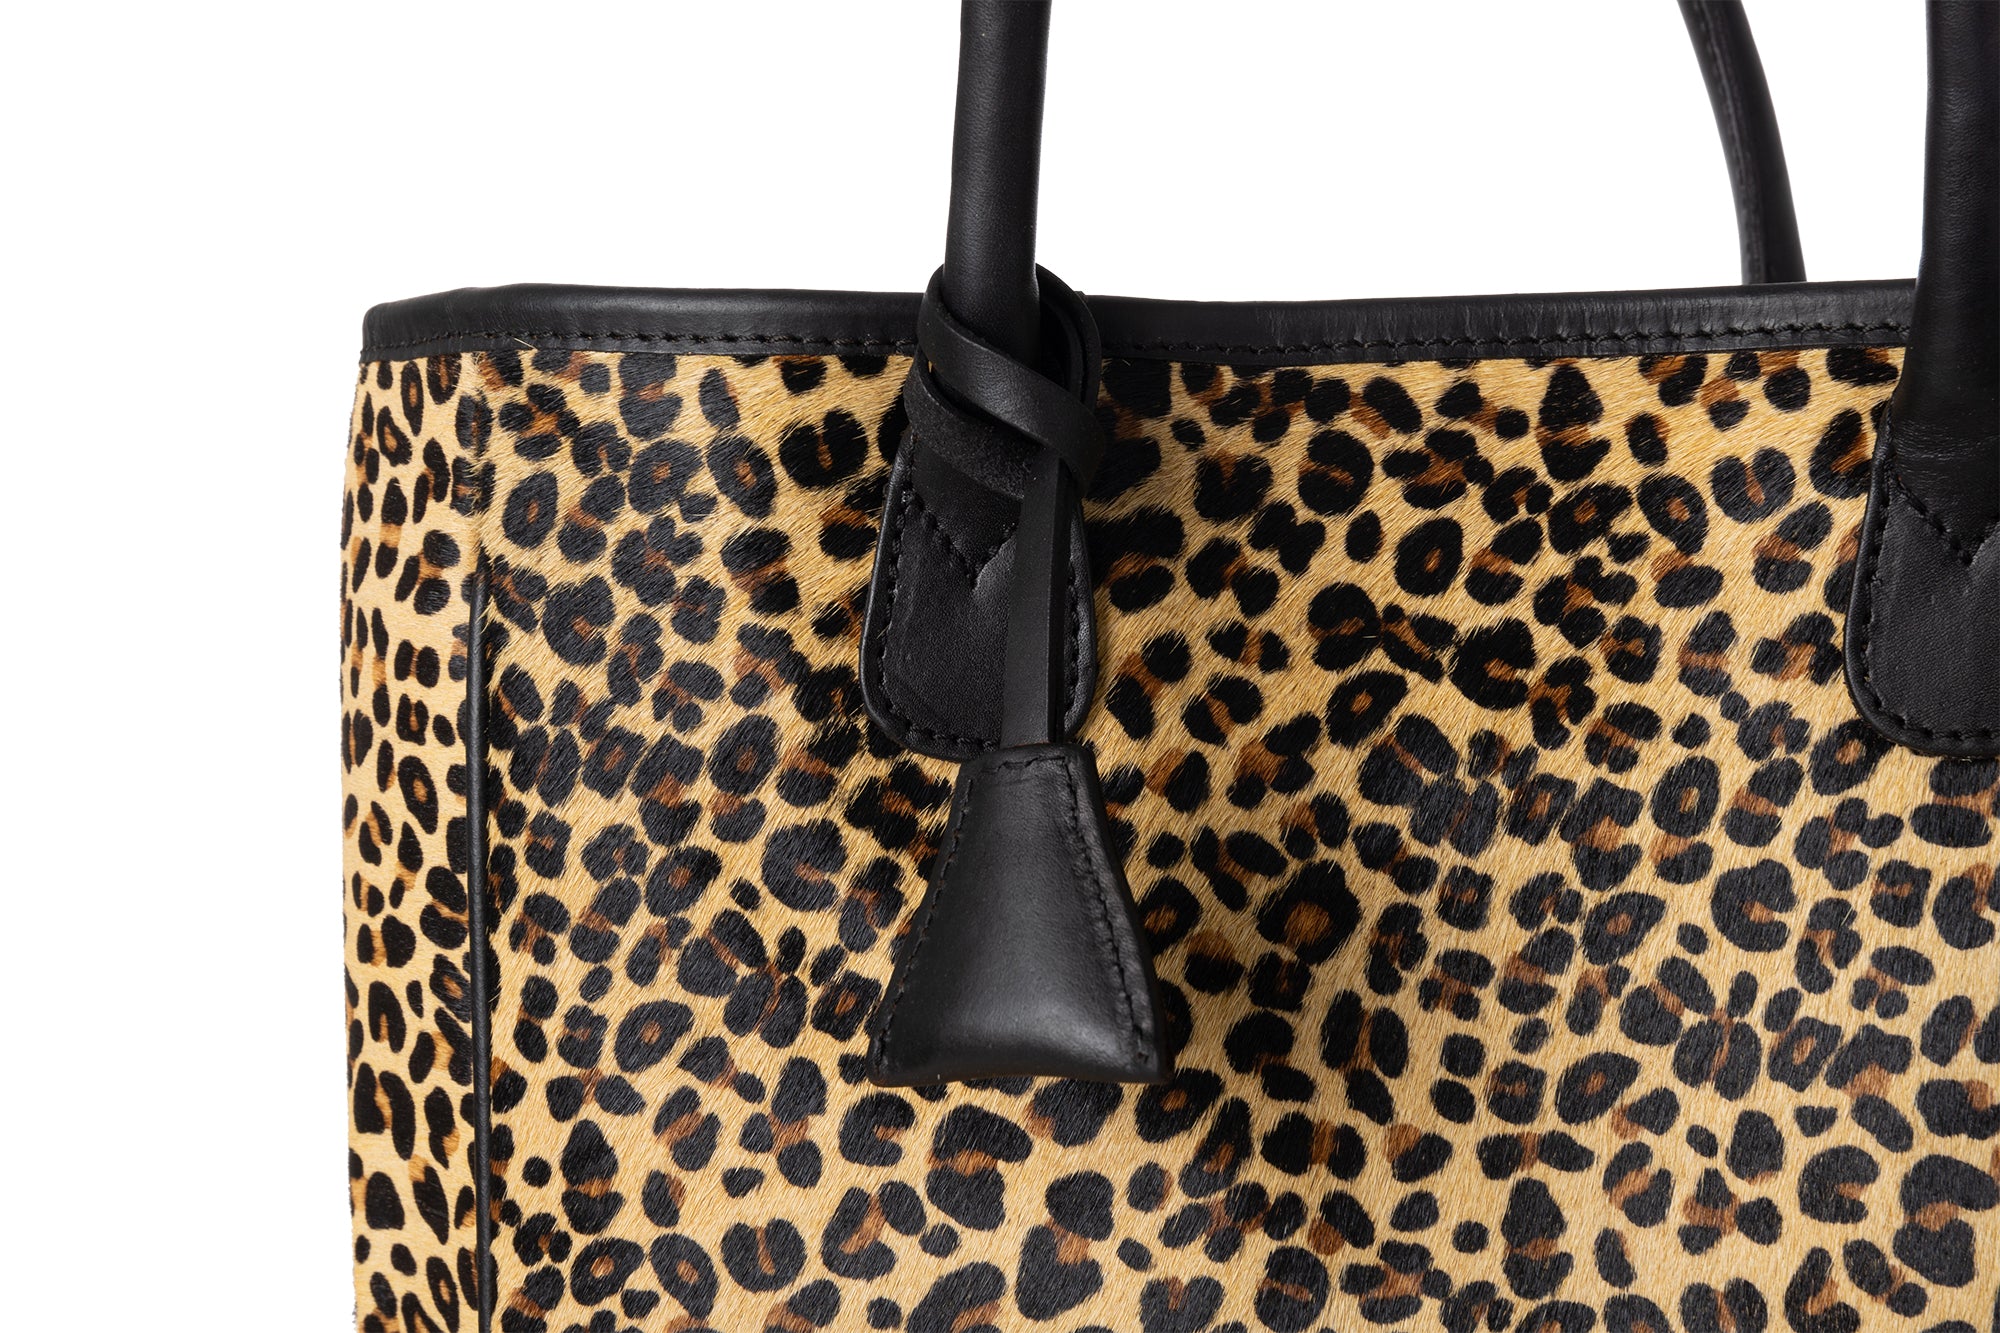 Buy Leopard 2 Purse Scarf Handle Covers Ivory Black Tan Animal Online in  India 